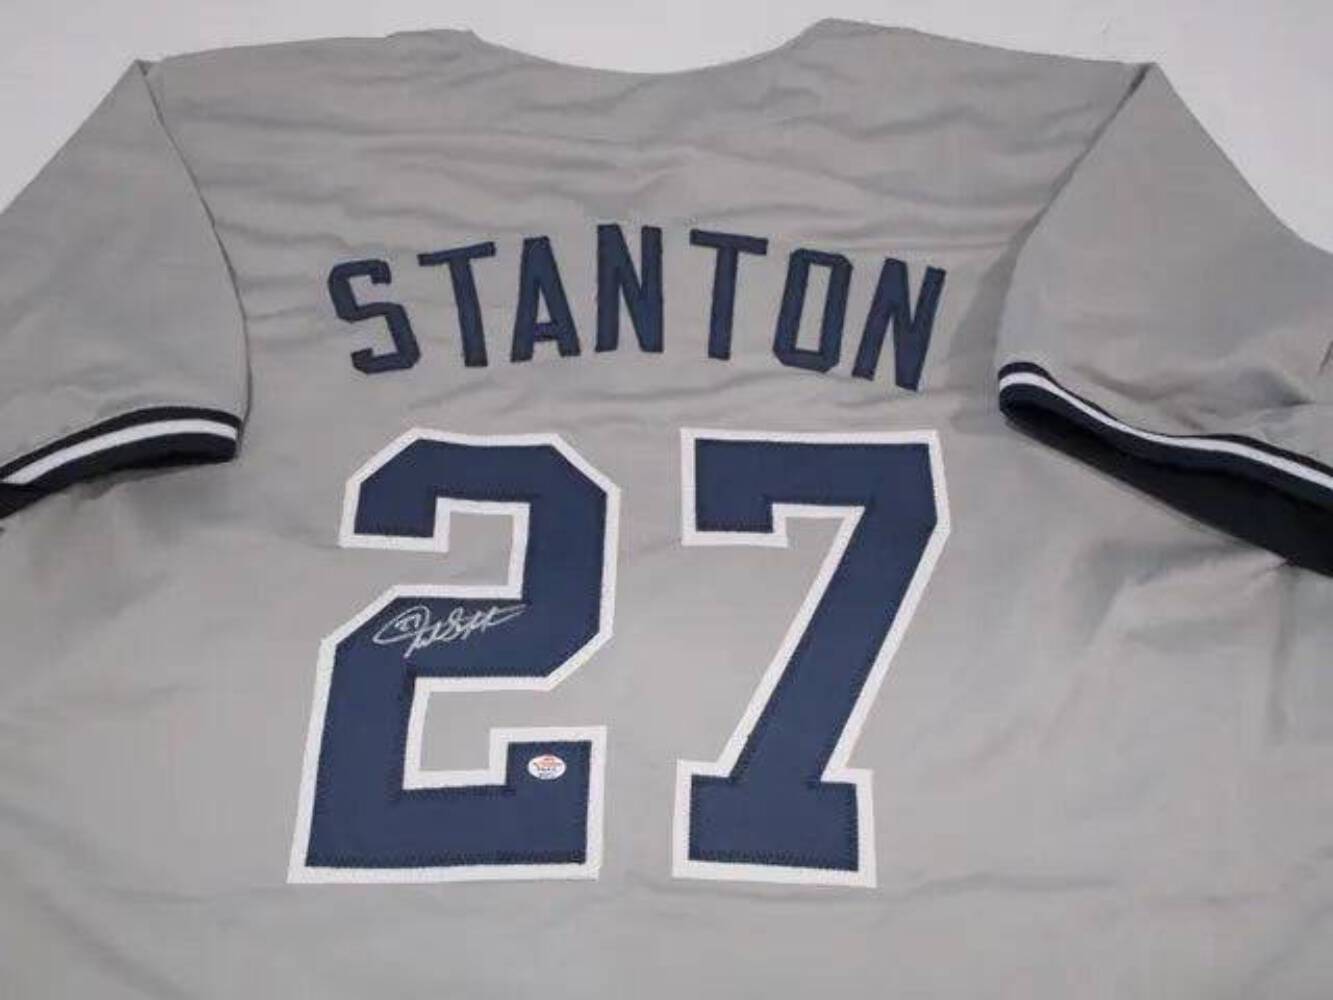 Giancarlo Stanton of the New York Yankees signed autographed baseball jersey PAA